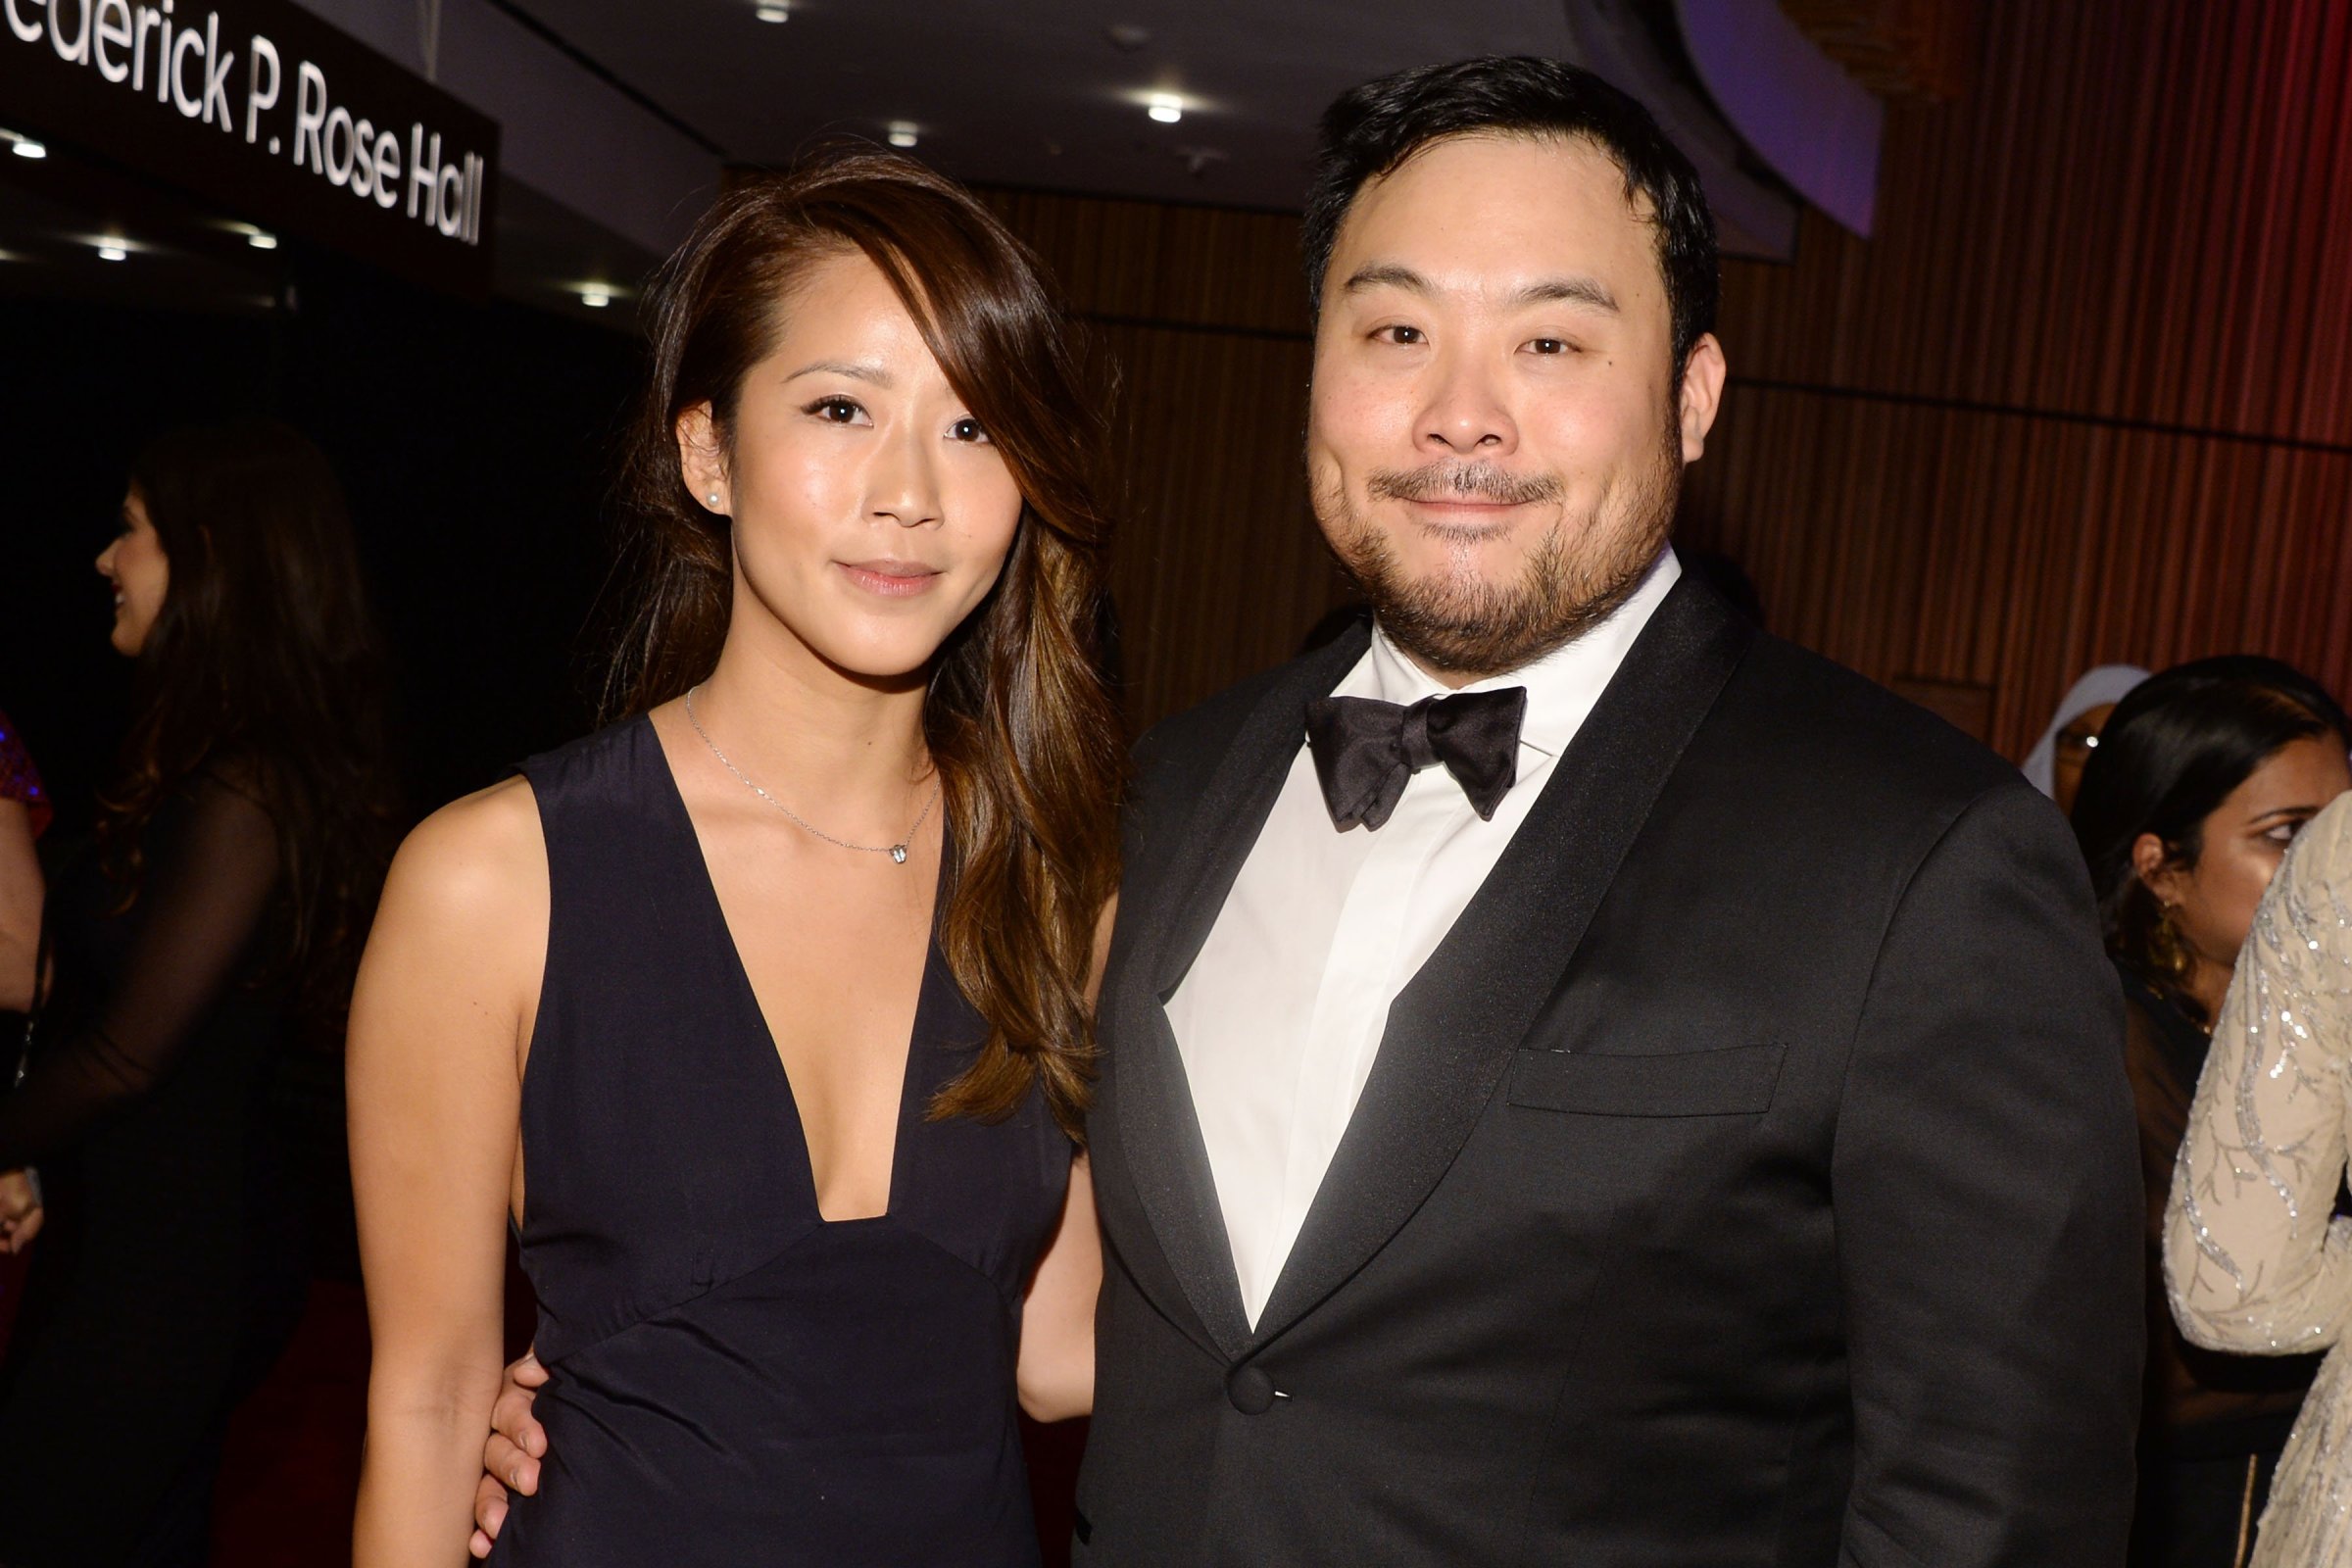 David Chang and Gloria Lee at the TIME 100 gala in New York on April 26, 2016.